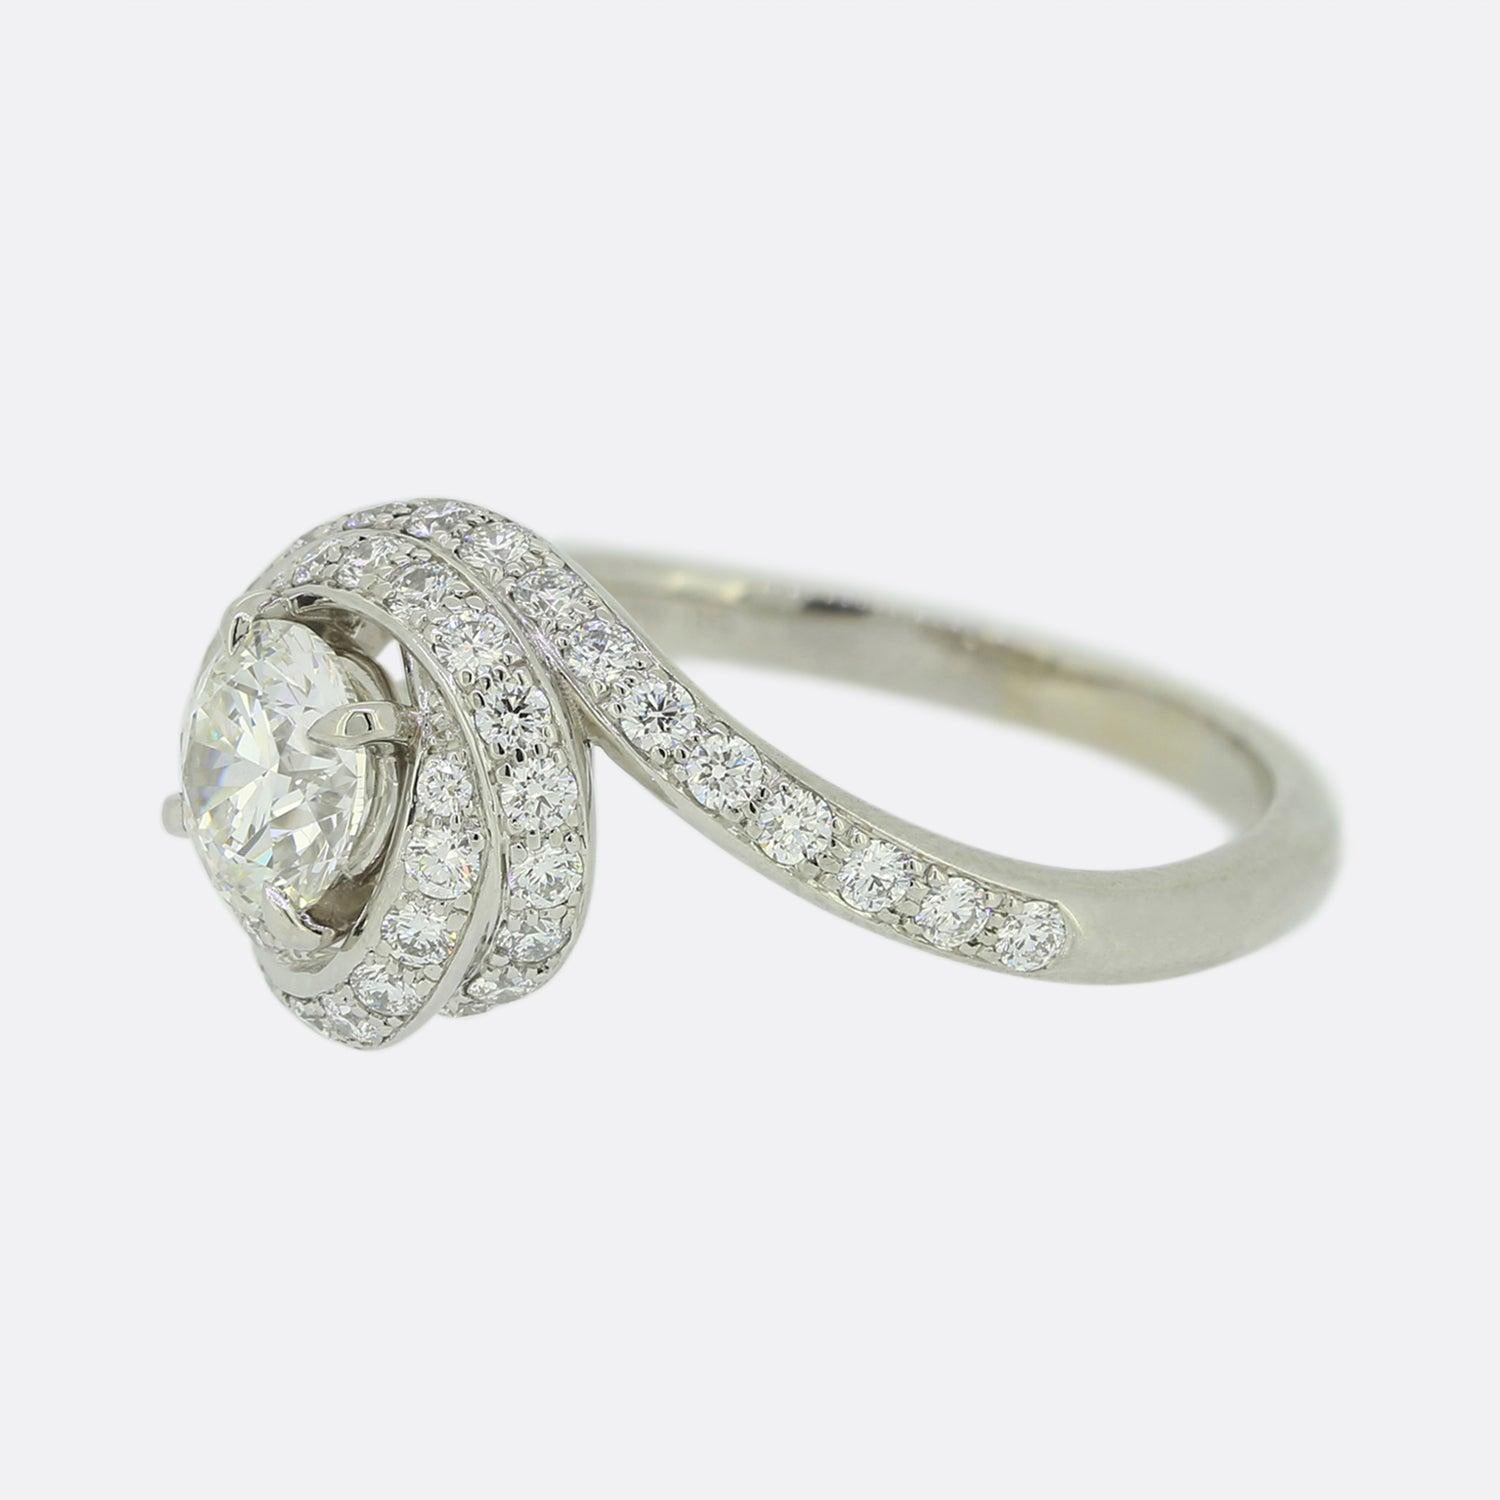 Here we have an iconic ring from the world renowned jewellery house of Cartier. With this particular piece, Cartier's Trinity symbol has been re-worked into a bejewelled ribbon around the main stone. On a beautiful platinum band sits a large